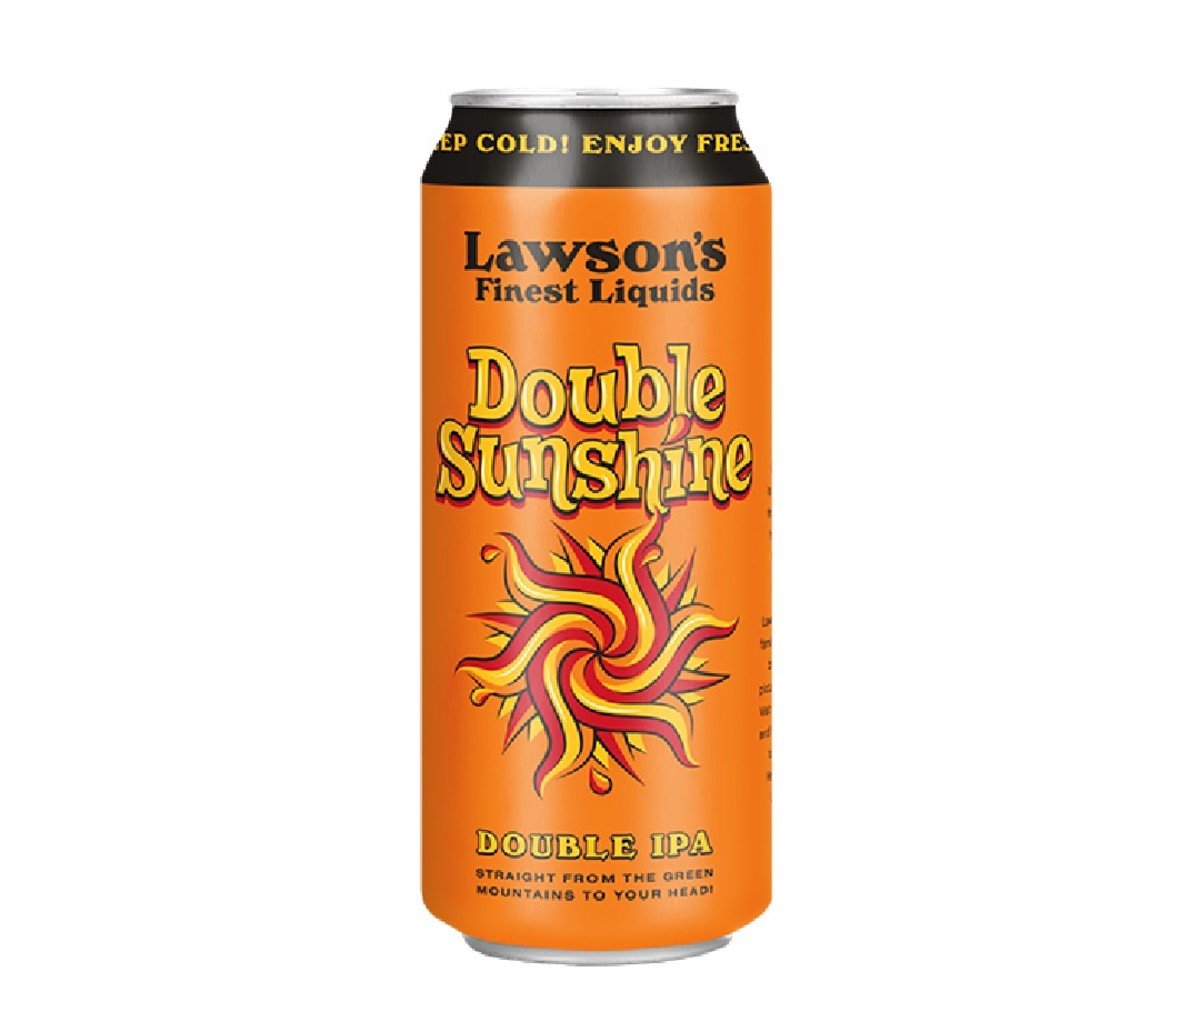 Can of Lawson’s Finest Double Sunshine IPA beer